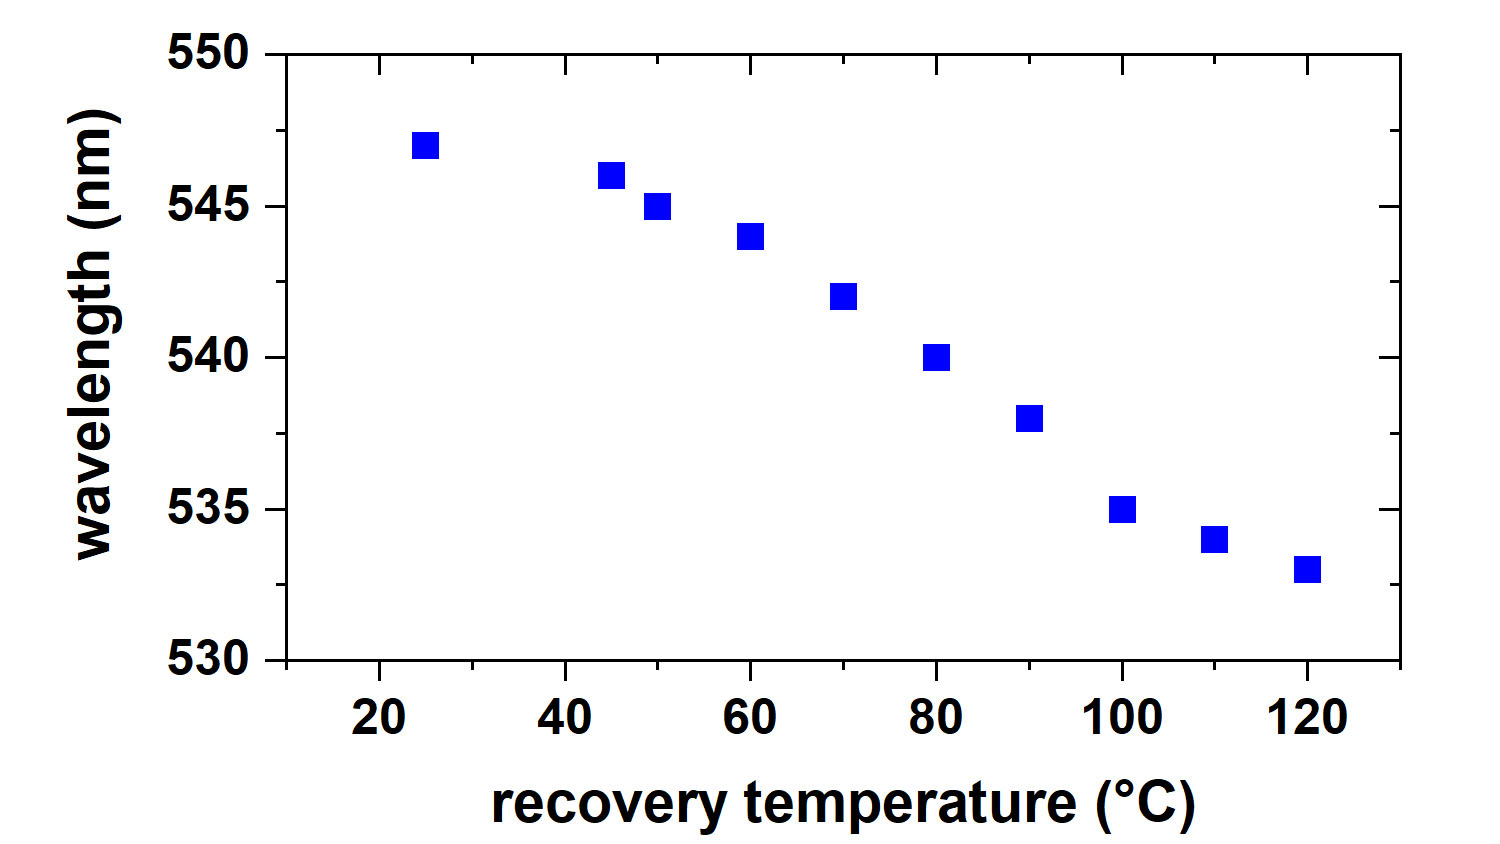 Peak wavelength of the polarized optical extinction spectrum as a function of the recovery temperature